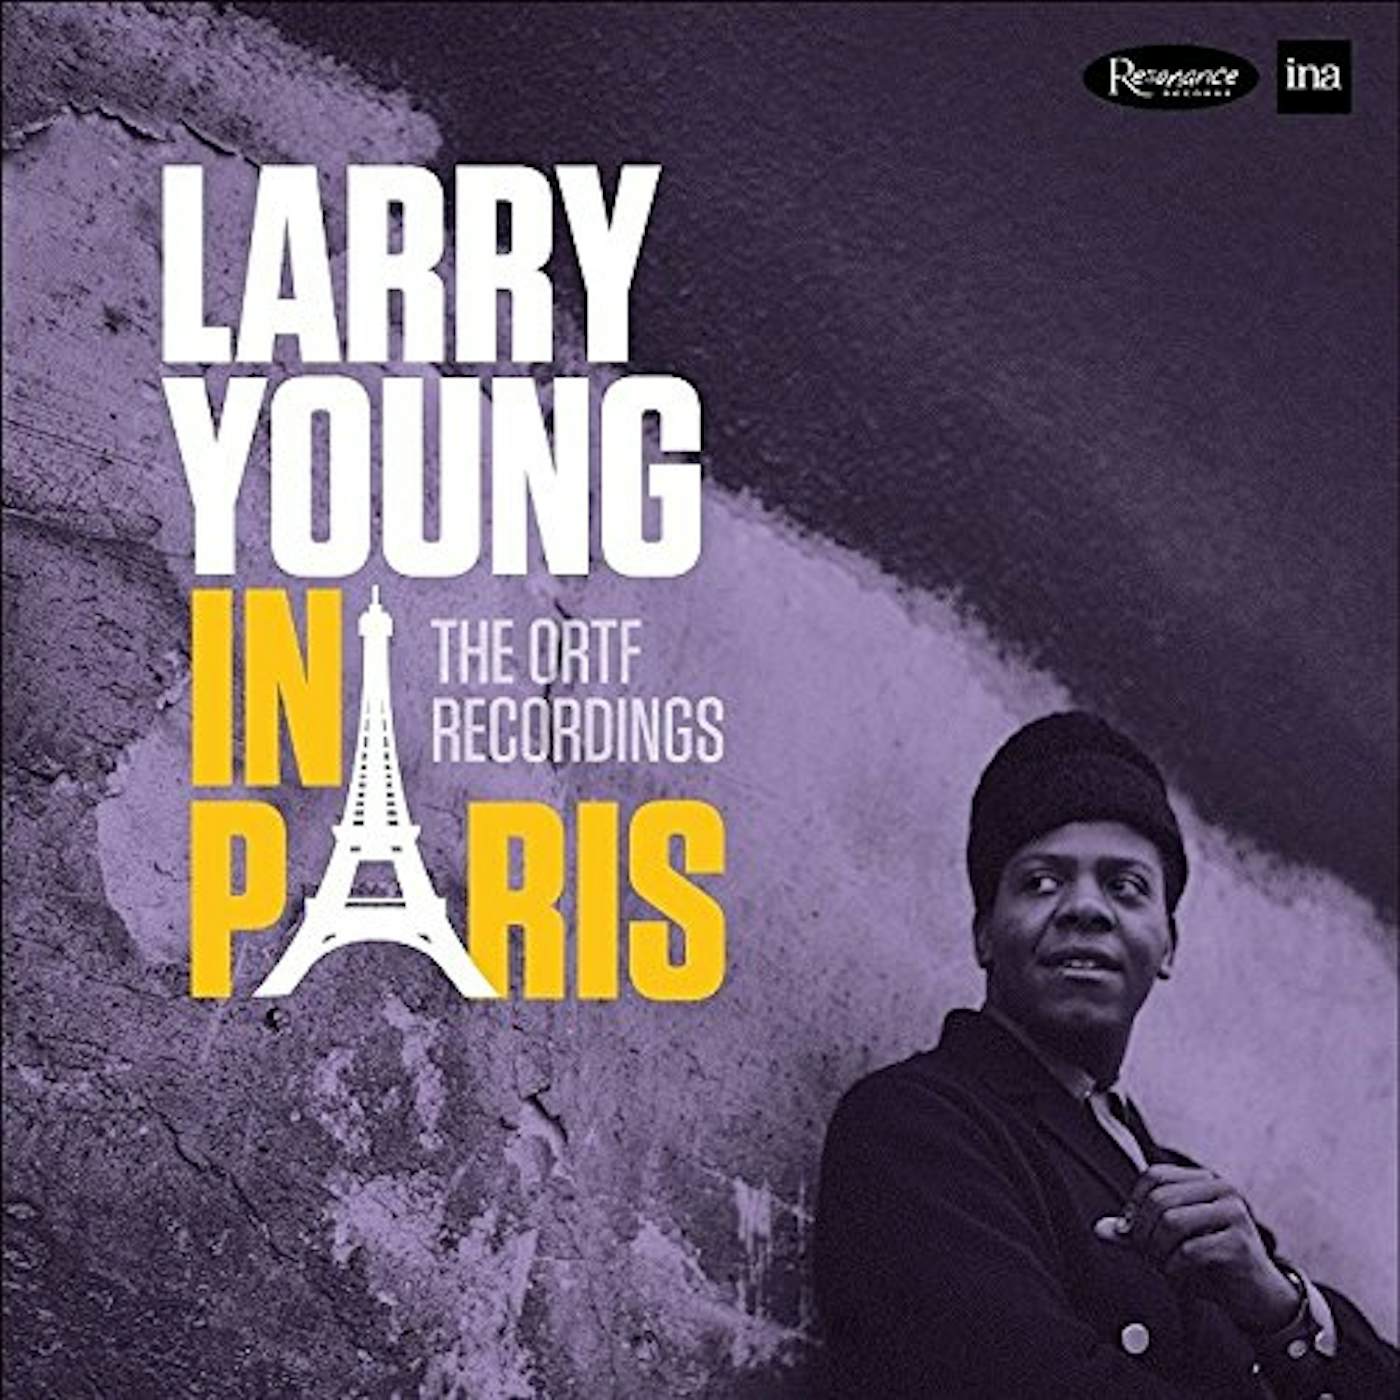 Larry Young IN PARIS: THE ORTF RECORDINGS Vinyl Record